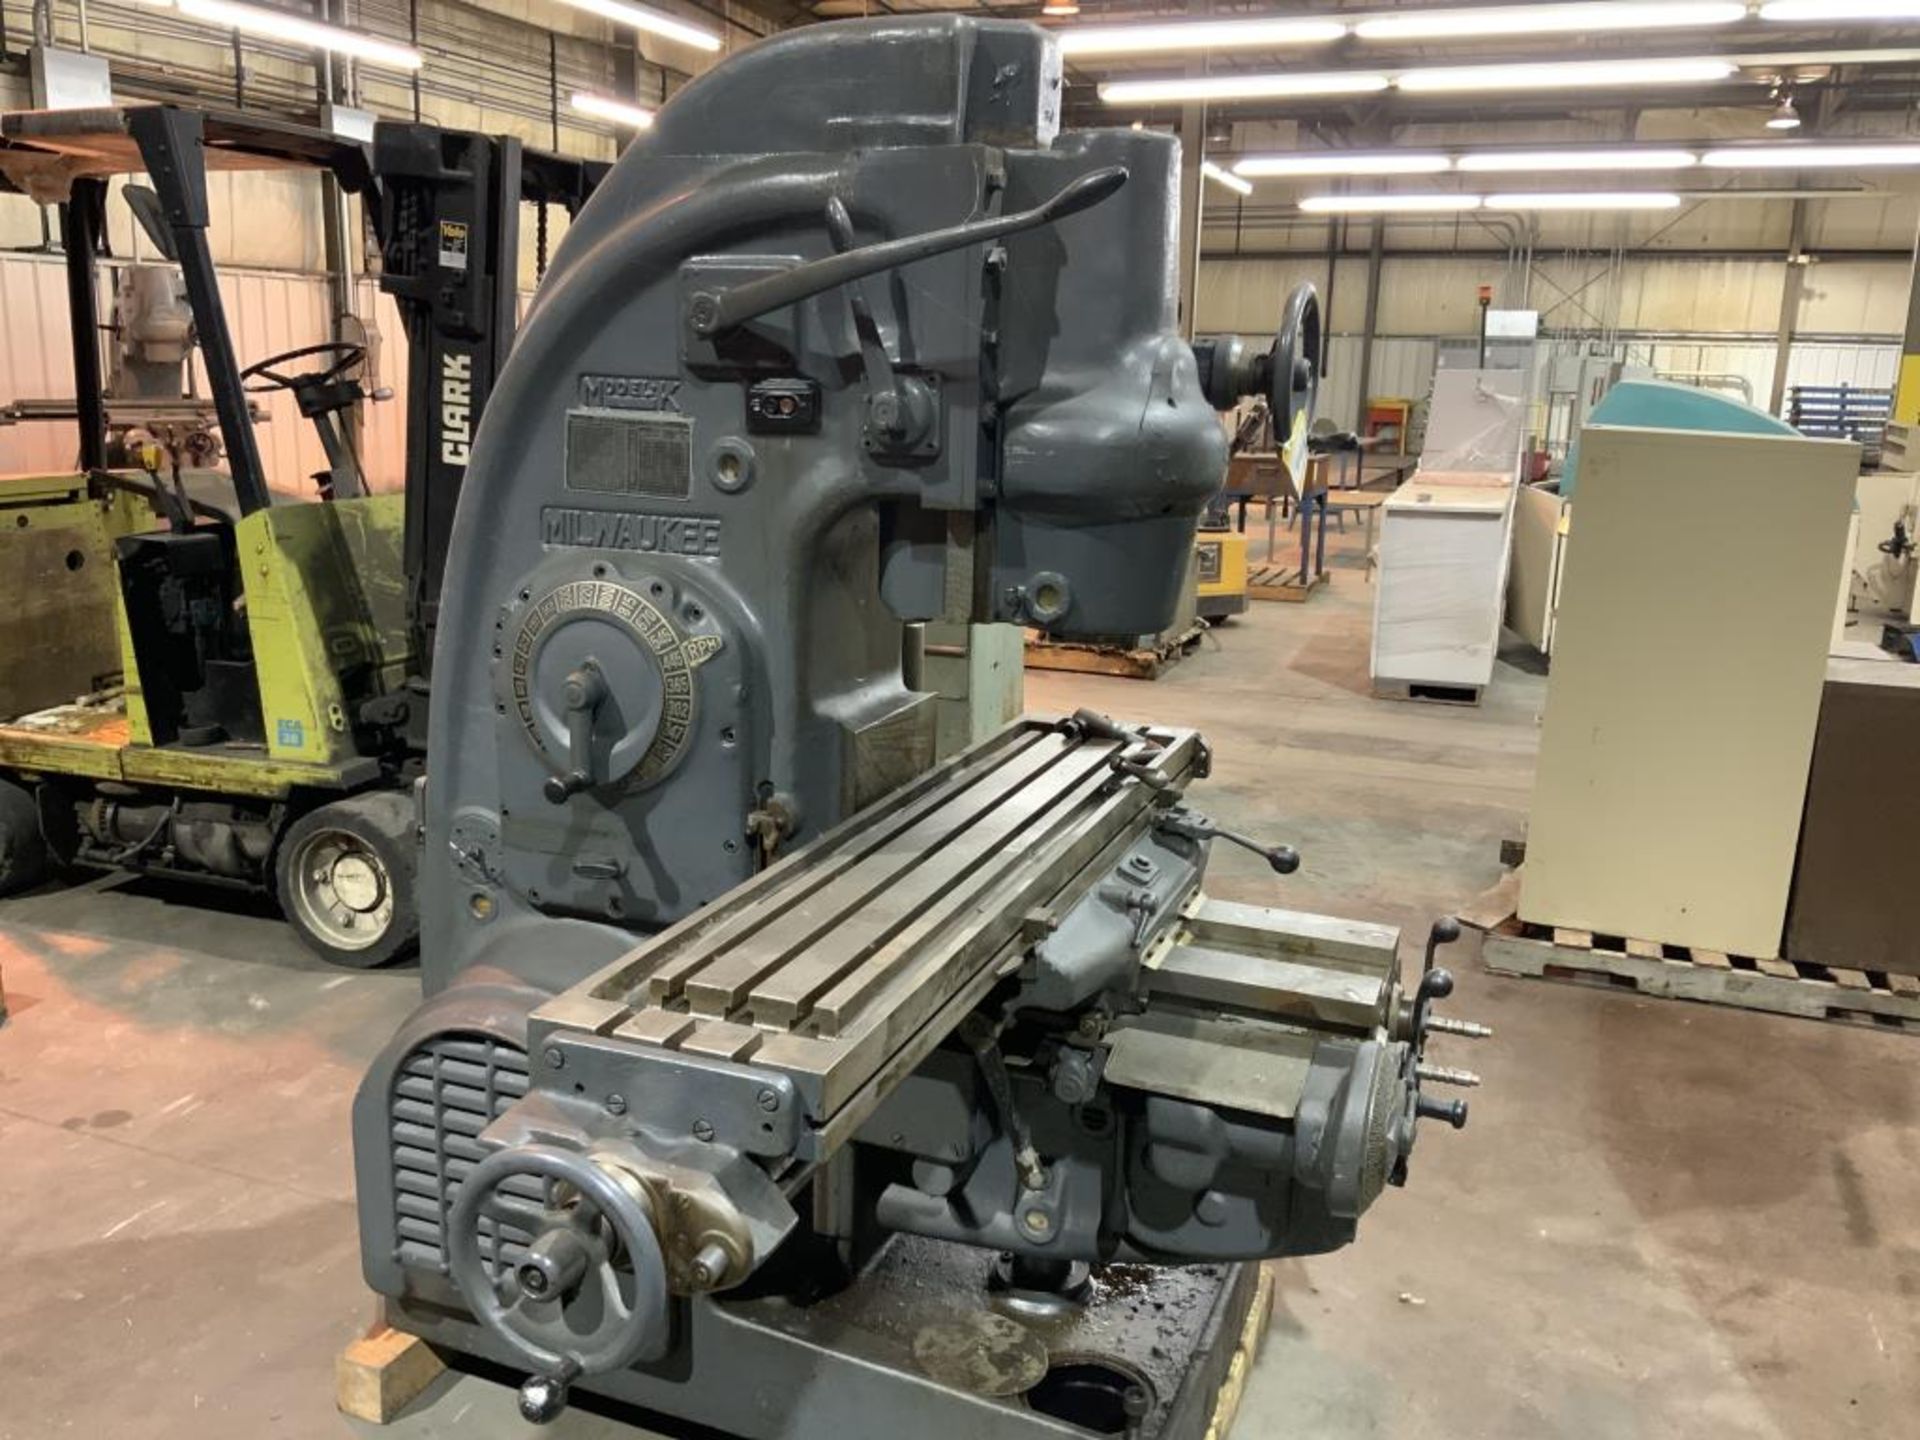 Vertical milling machine - Image 2 of 2